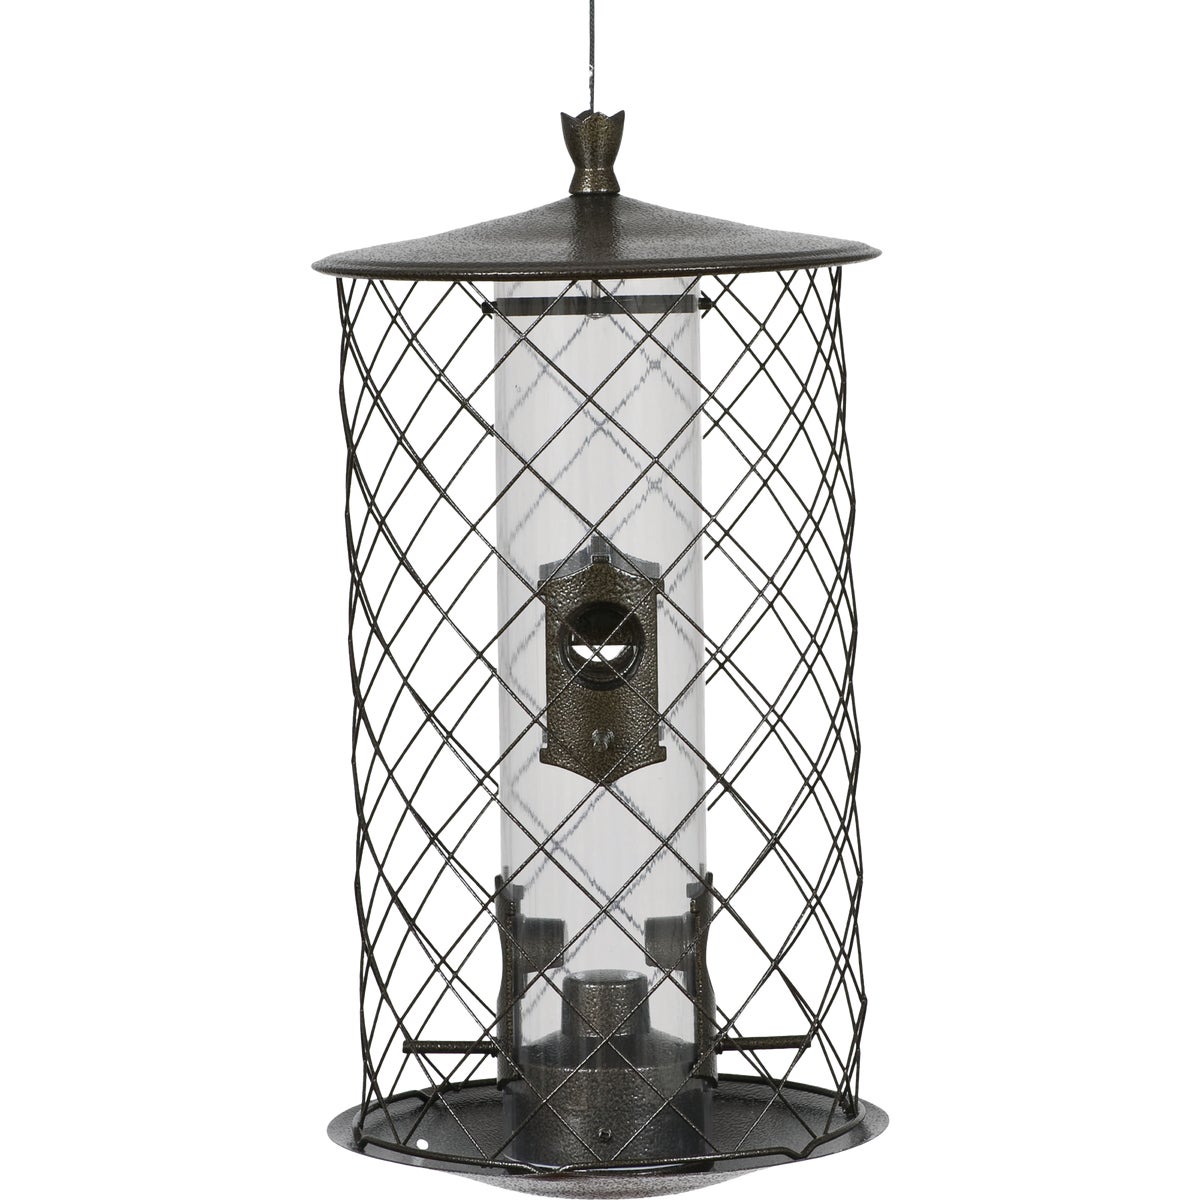 Item 702614, The Preserve Feeder features a decorative metal top, feeding ports, perches